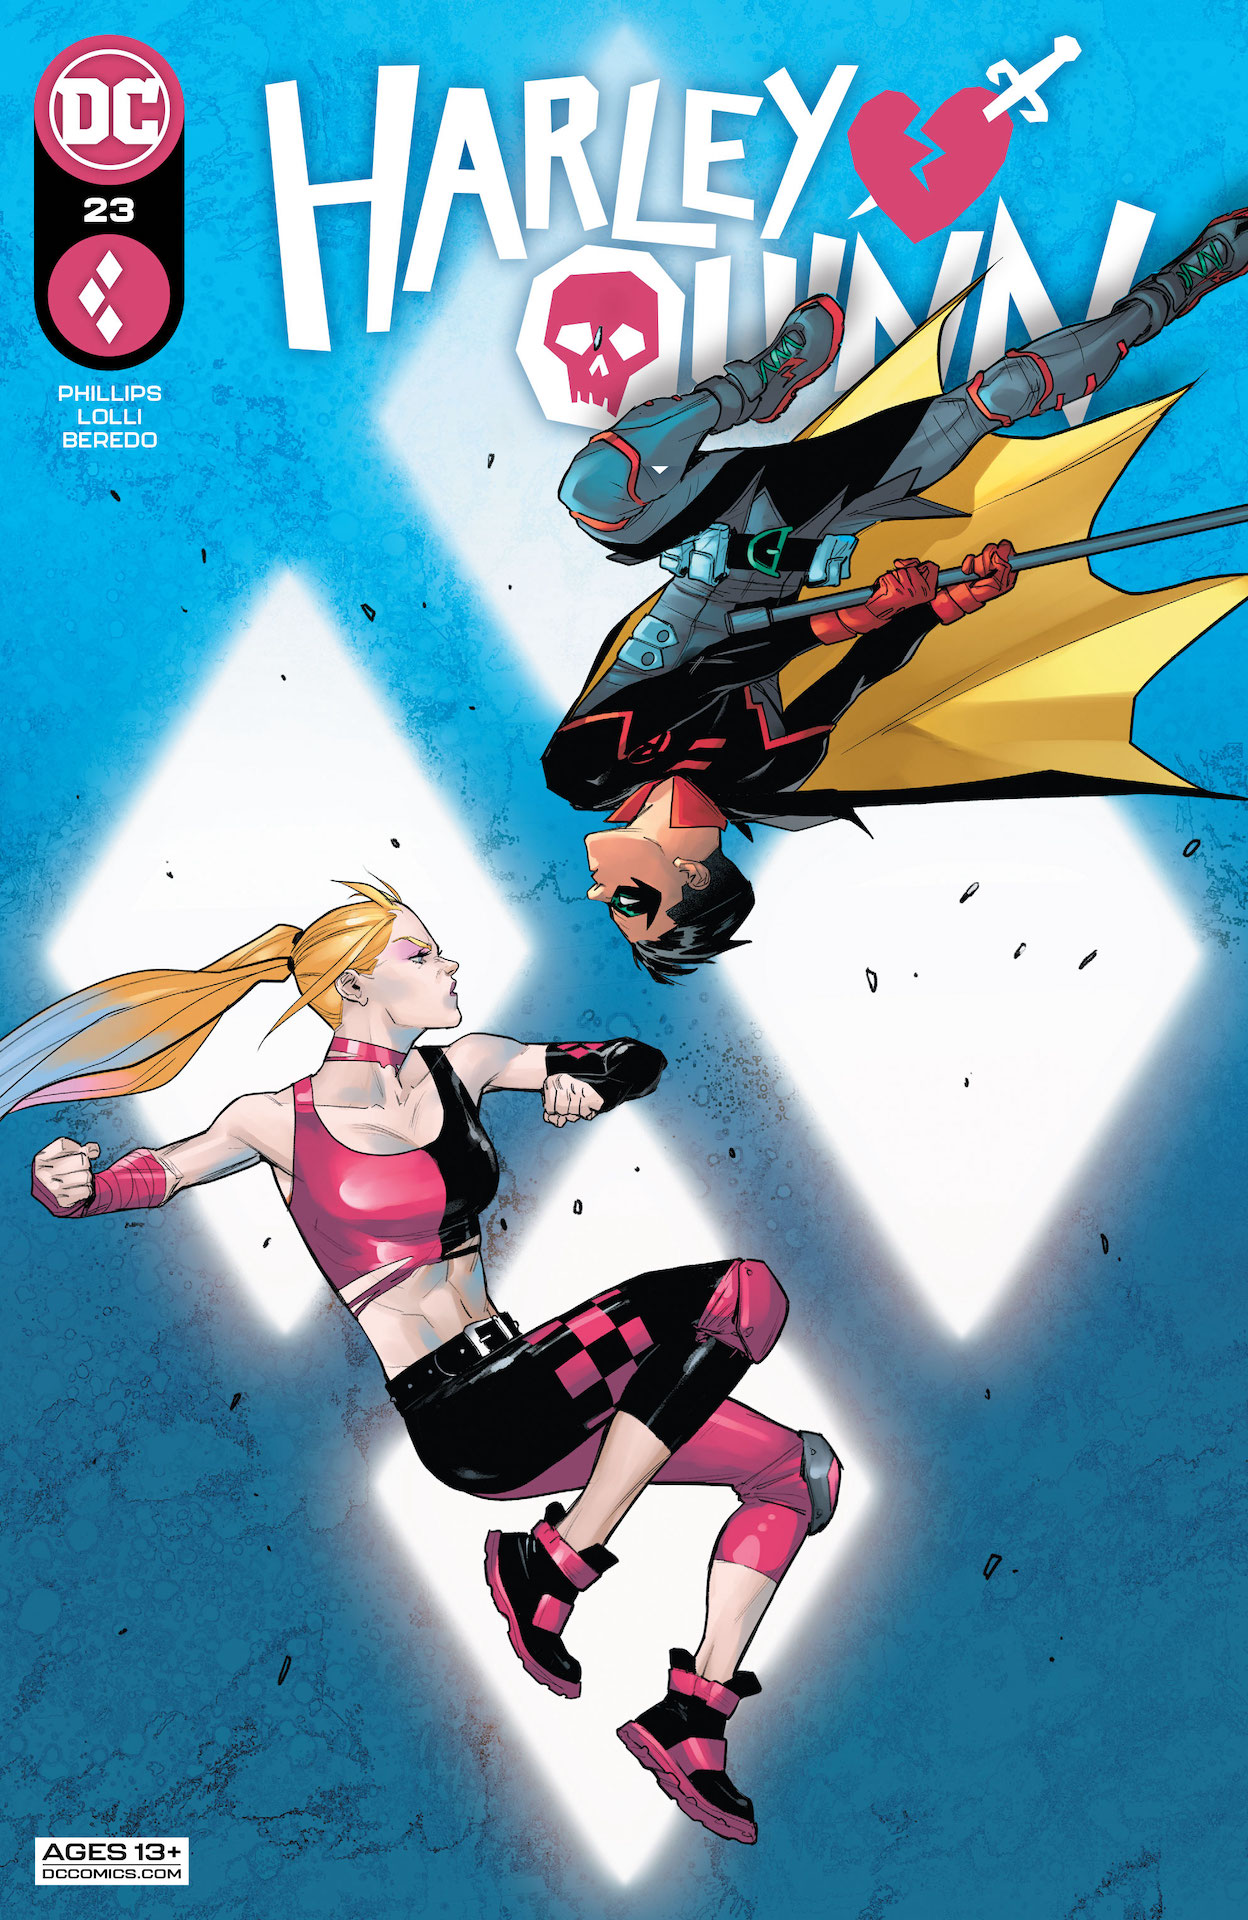 DC Preview: Harley Quinn #23